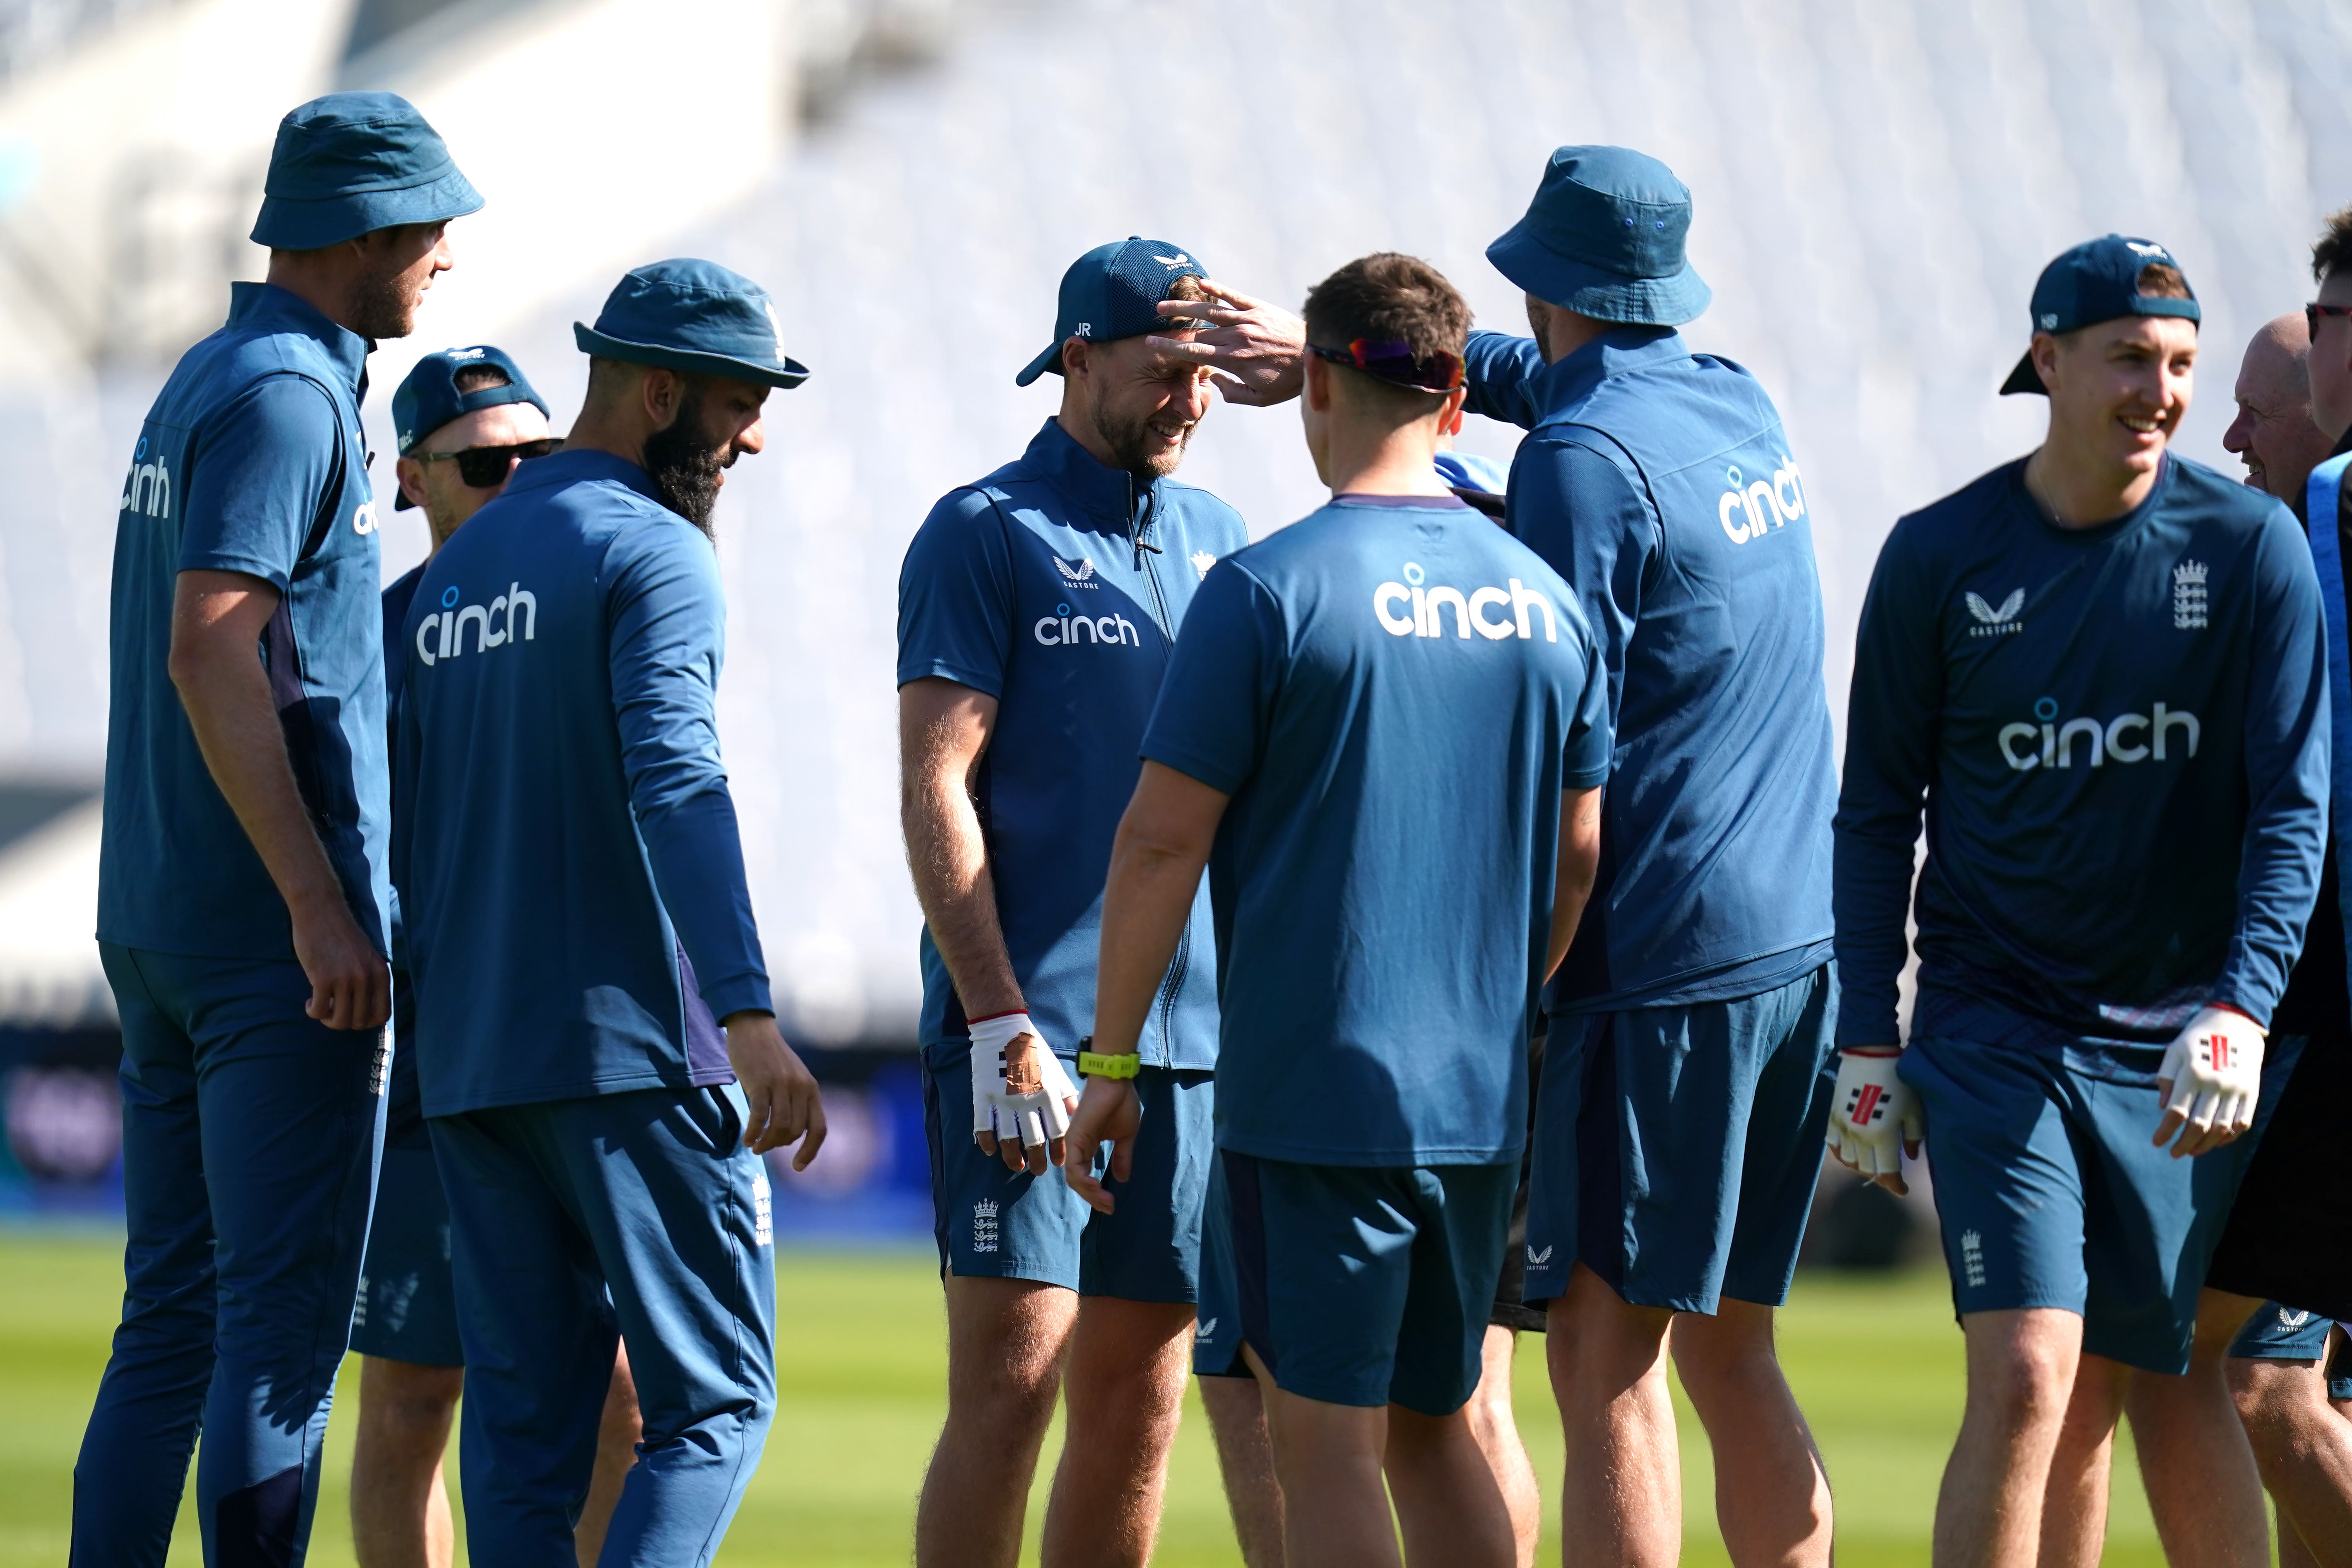 Day one of fifth Ashes Test England aiming to deny Australia series win The Independent